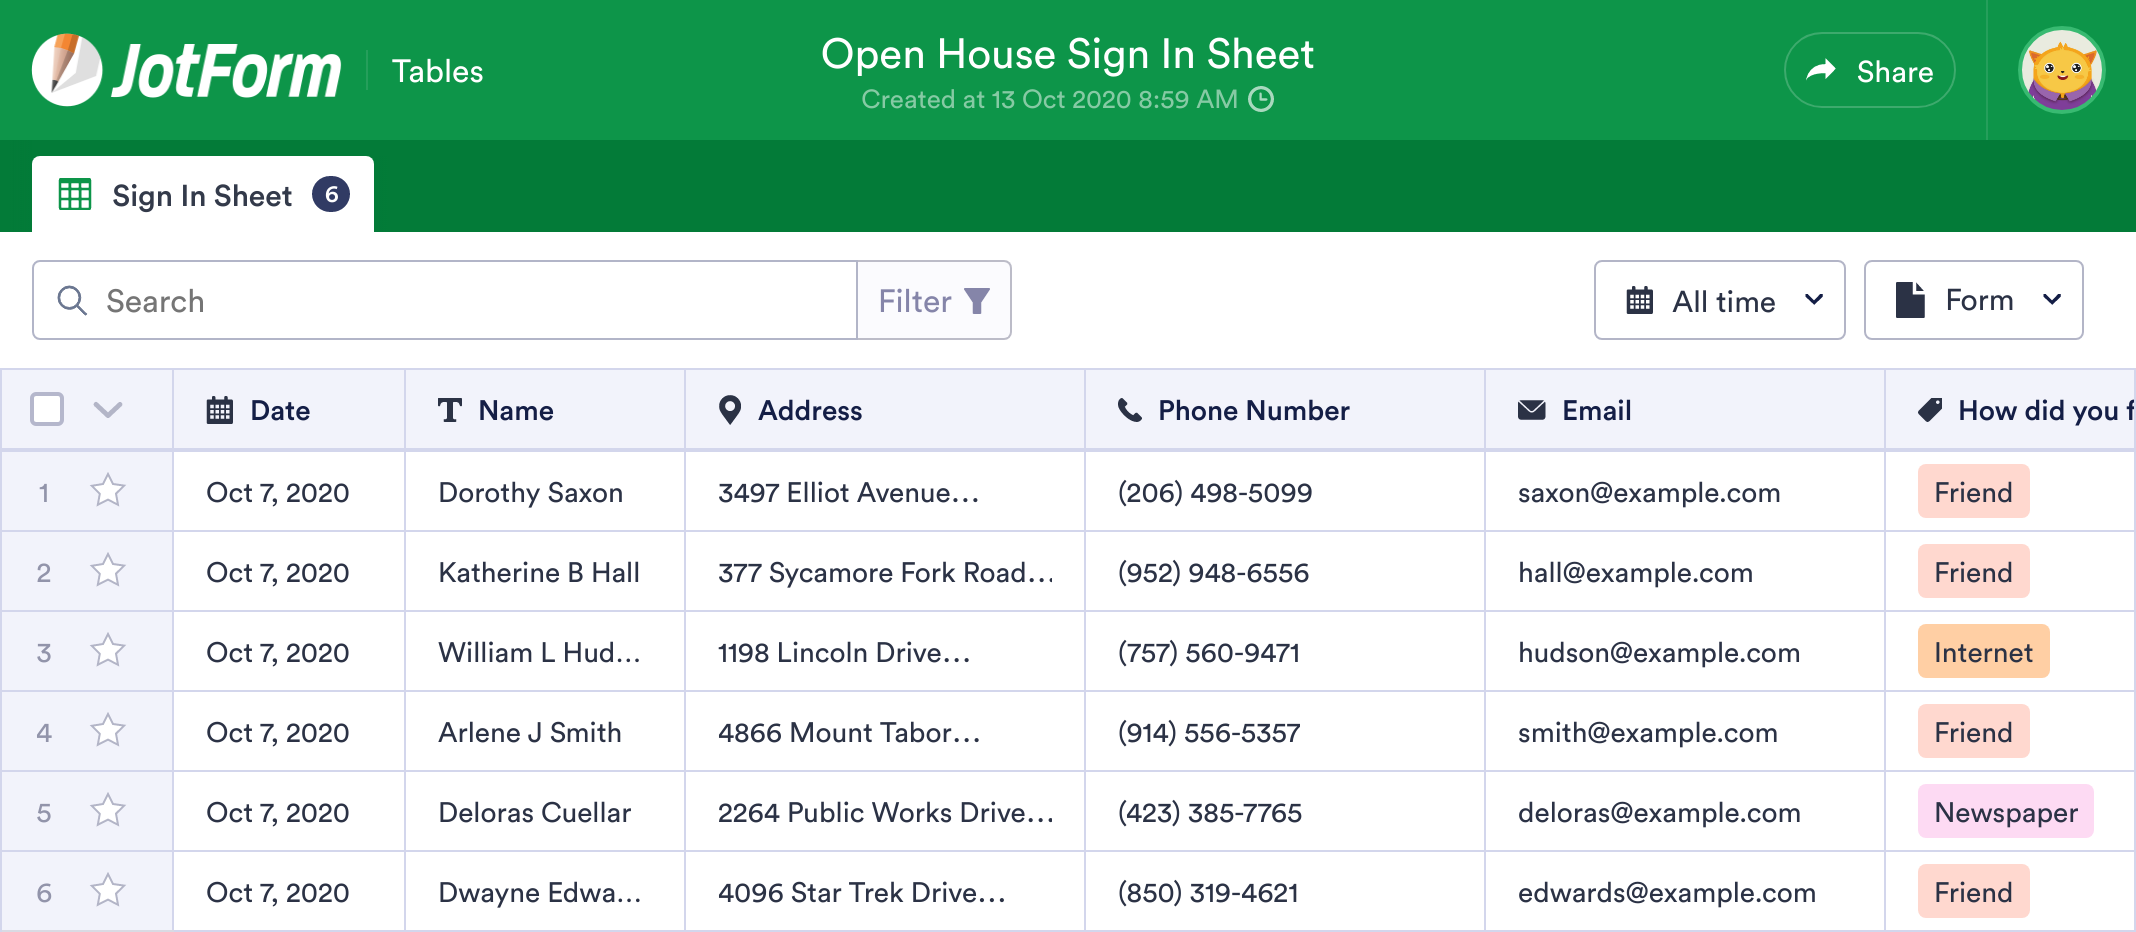 open-house-sign-in-sheet-template-jotform-tables